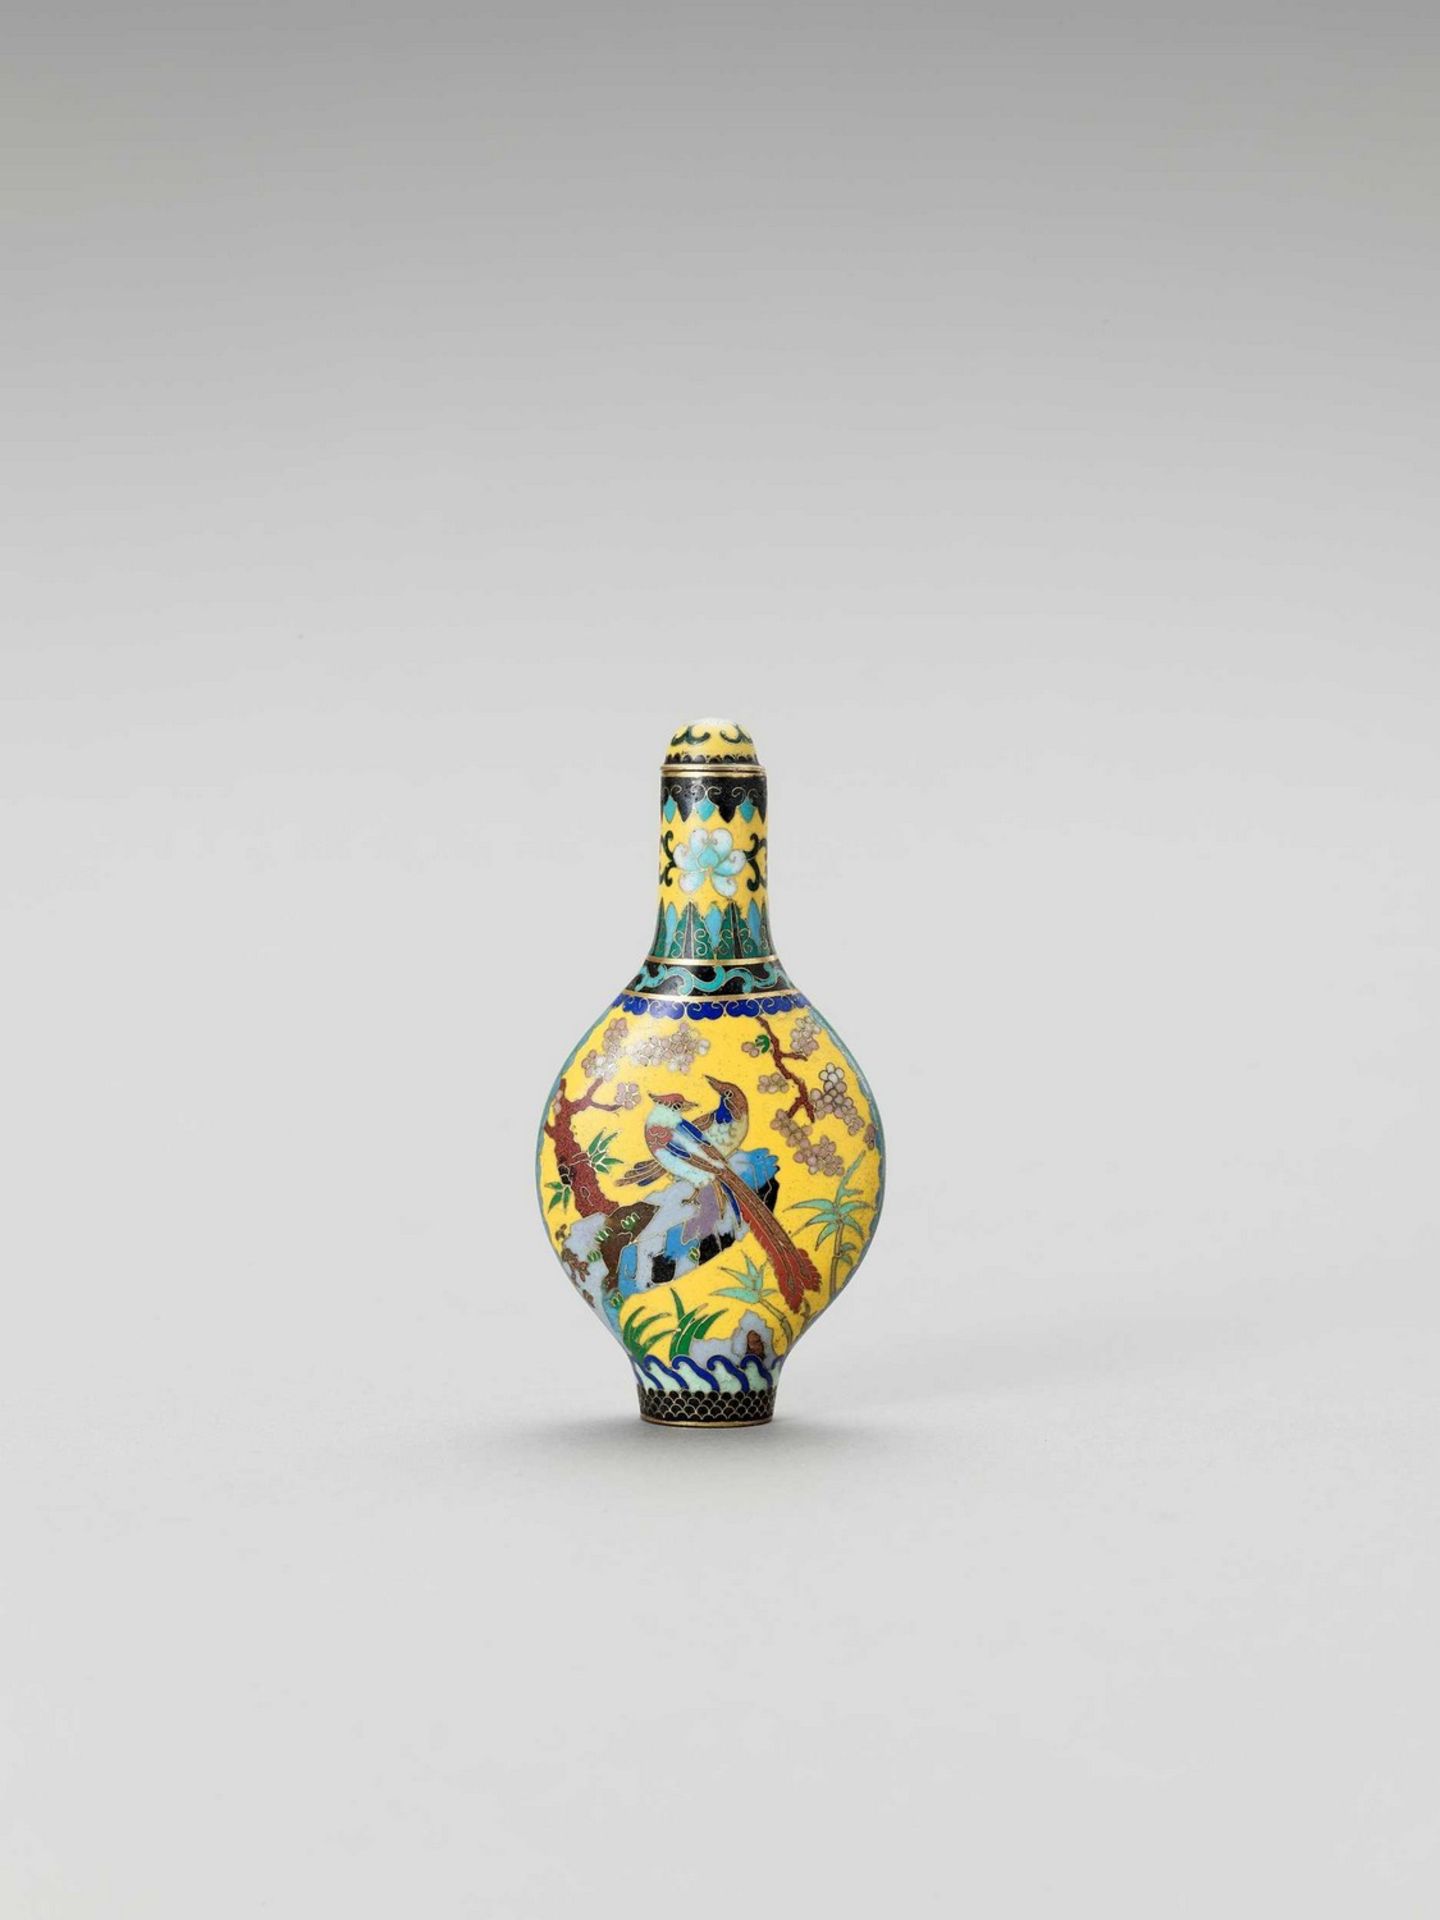 A CLOISONNE SNUFF BOTTLE WITH BIRDS